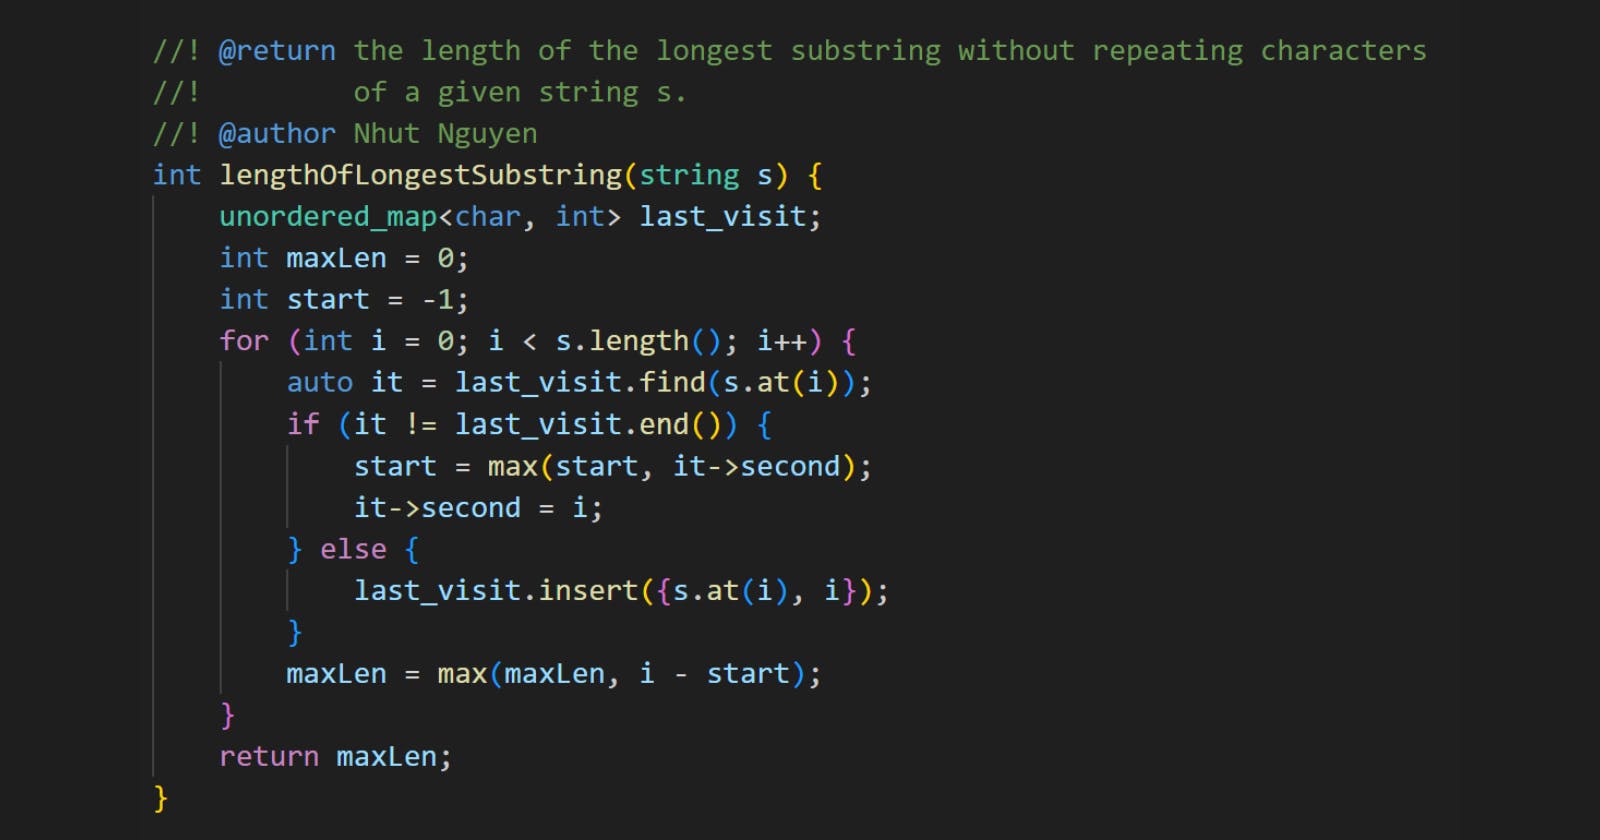 3. Longest Substring Without Repeating Characters